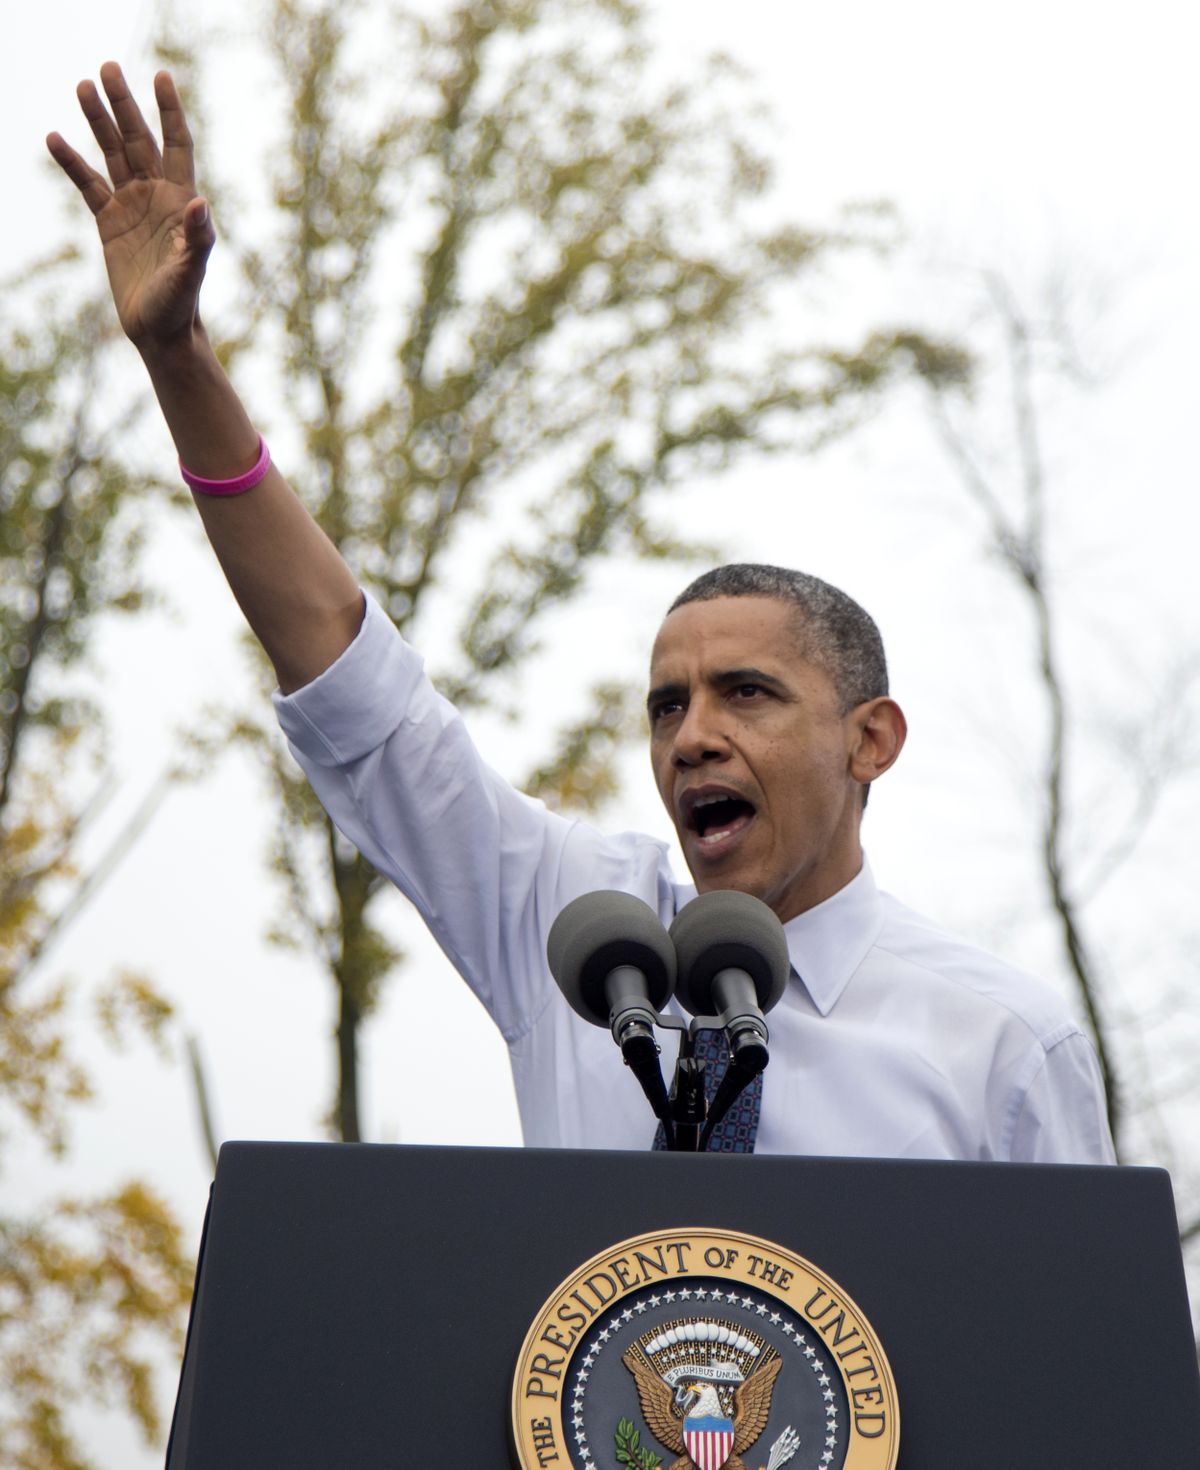 President Barack Obama gestures while speaking about the choice facing women in the upcoming election, Friday, Oct. 19, 2012, at a campaign event at George Mason University in Fairfax, Va. (Carolyn Kaster / Associated Press)